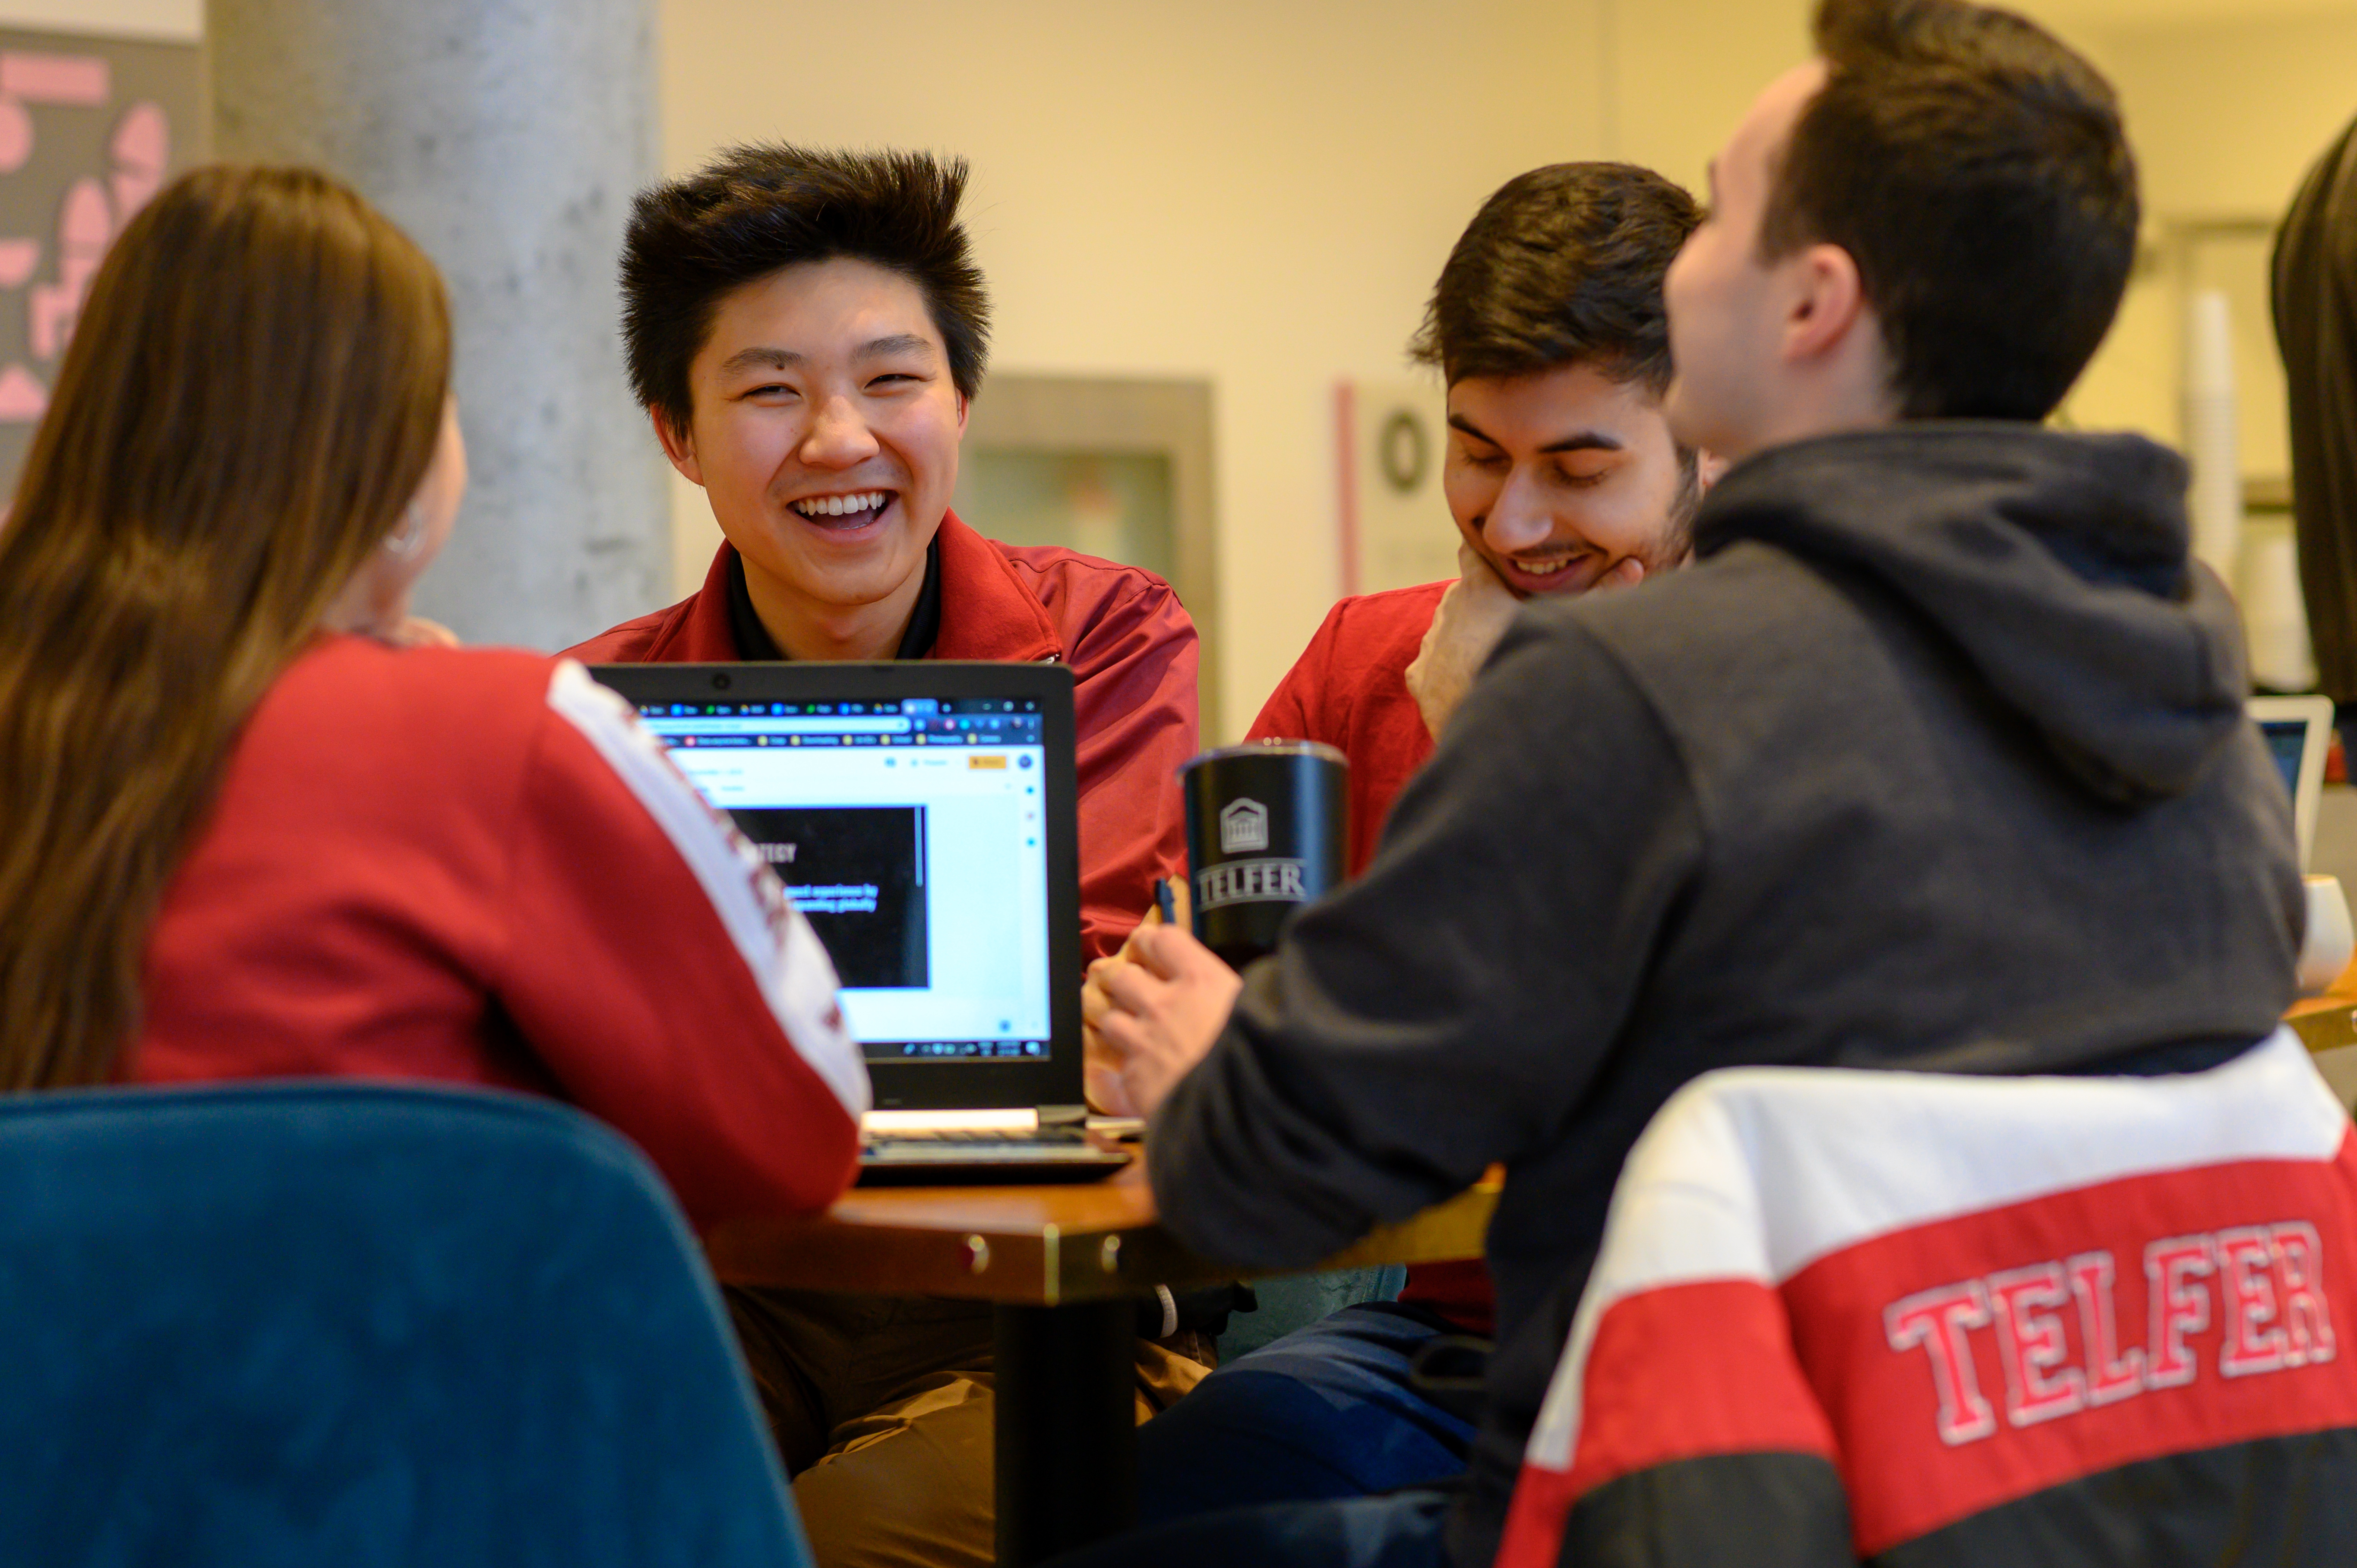 Group of Telfer students studying and laughing together